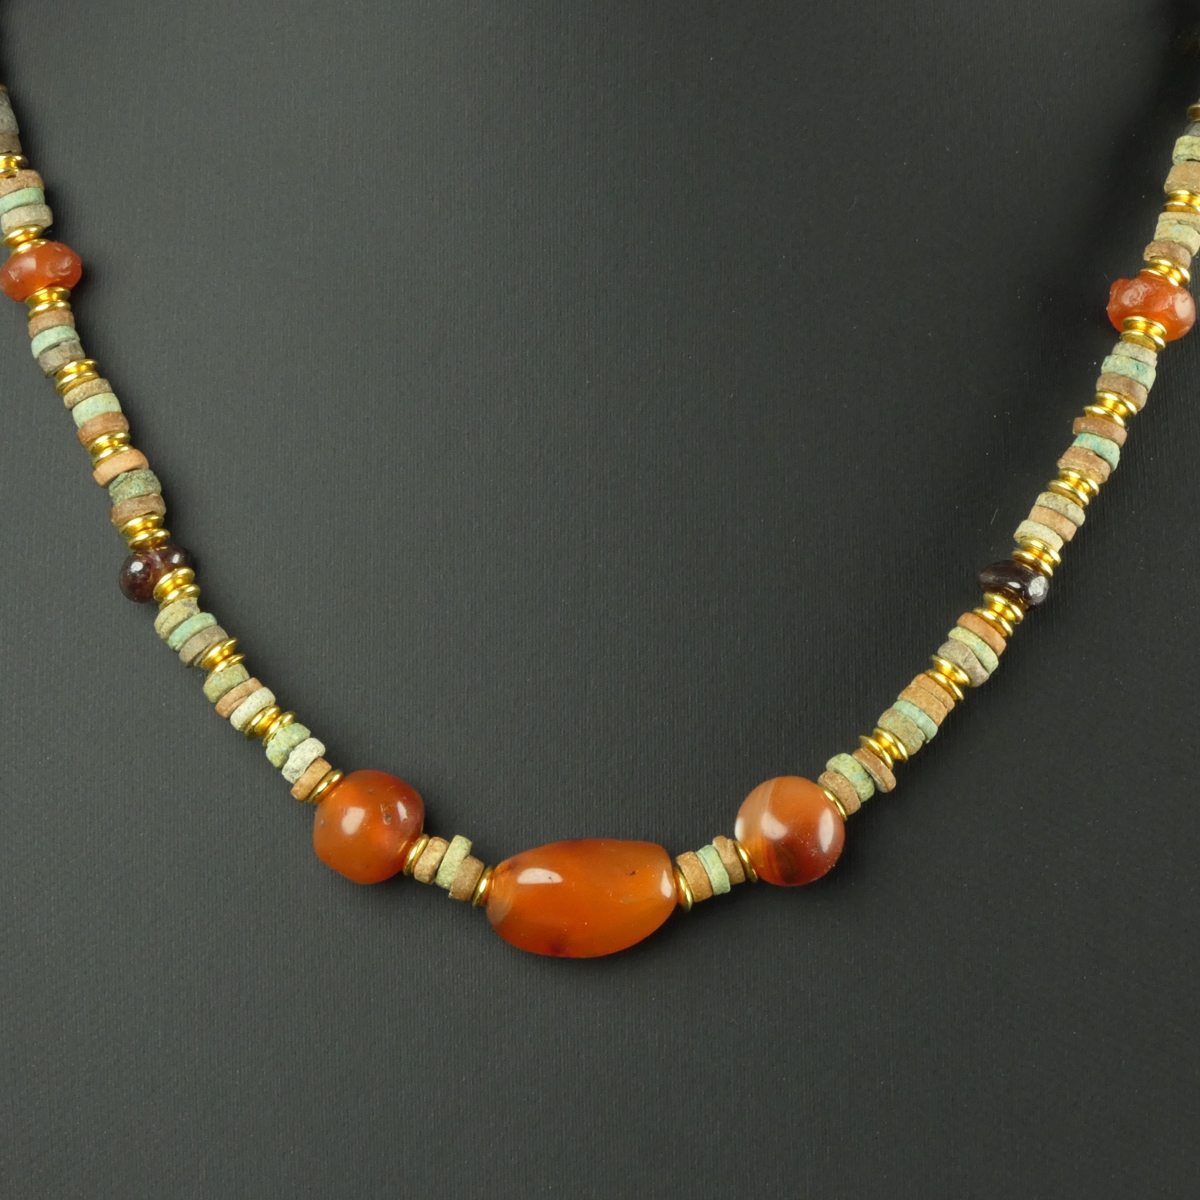 Necklace with Egyptian faience, carnelian and garnet beads